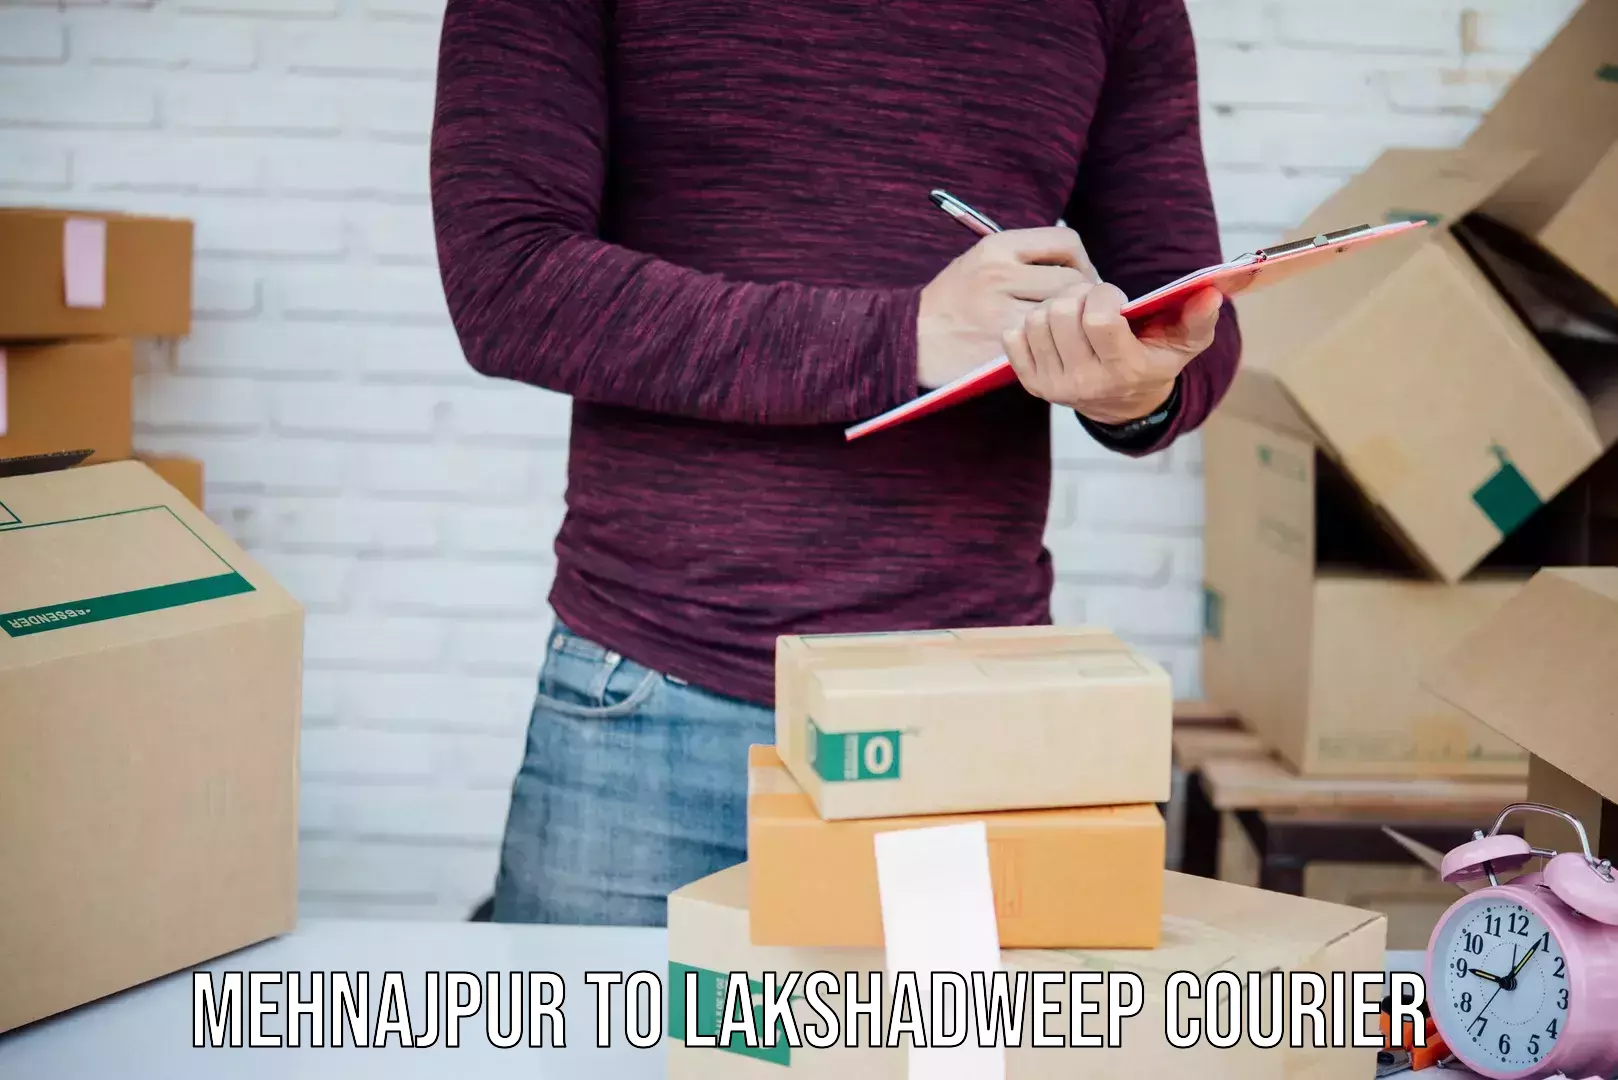 E-commerce fulfillment in Mehnajpur to Lakshadweep